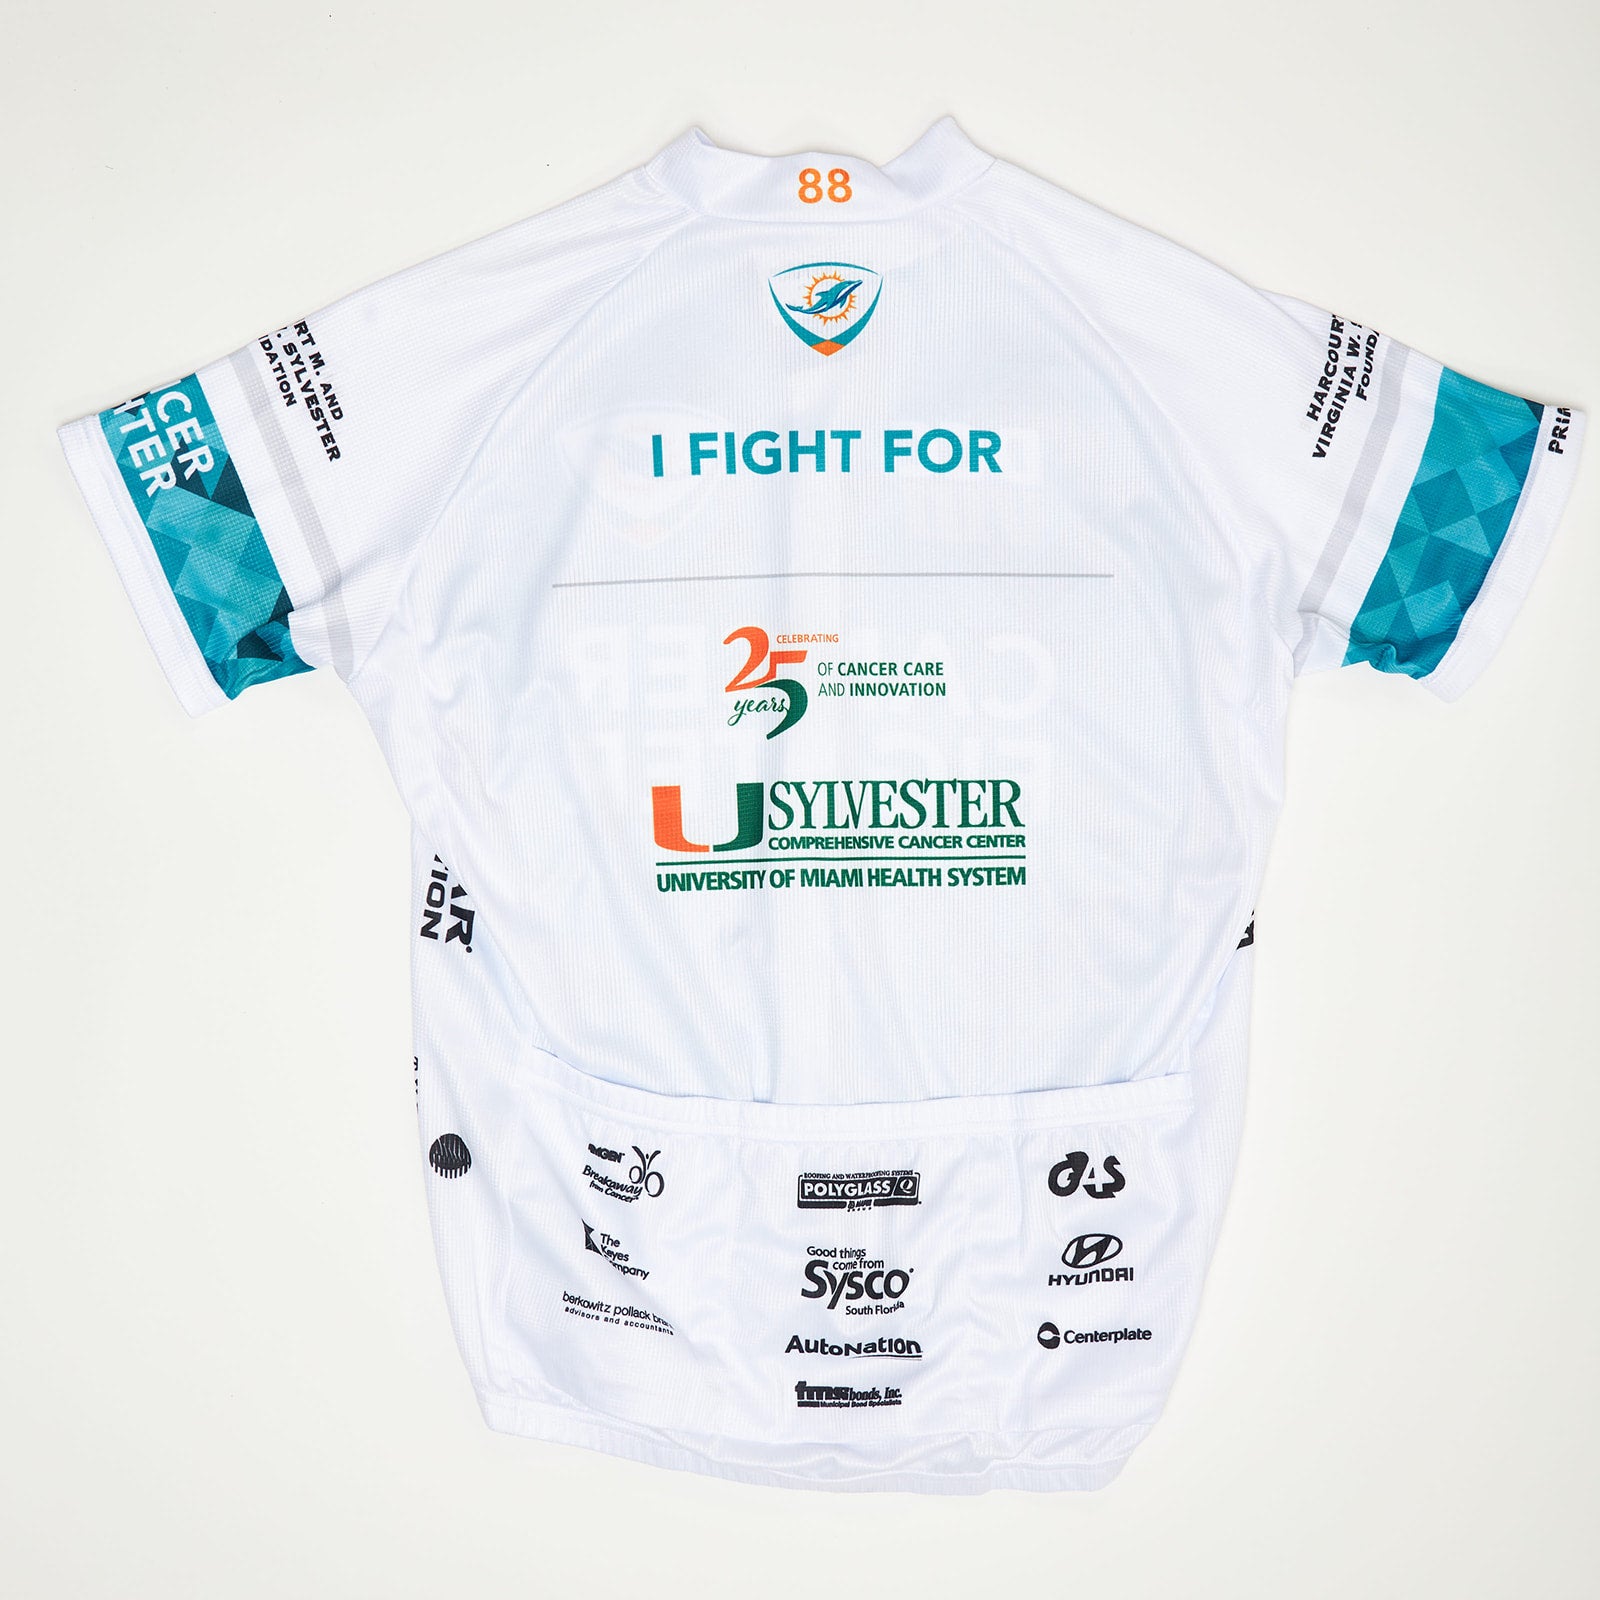 DCC VIII 2018 Women's Dolphins Cancer Challenge Cycling Jersey